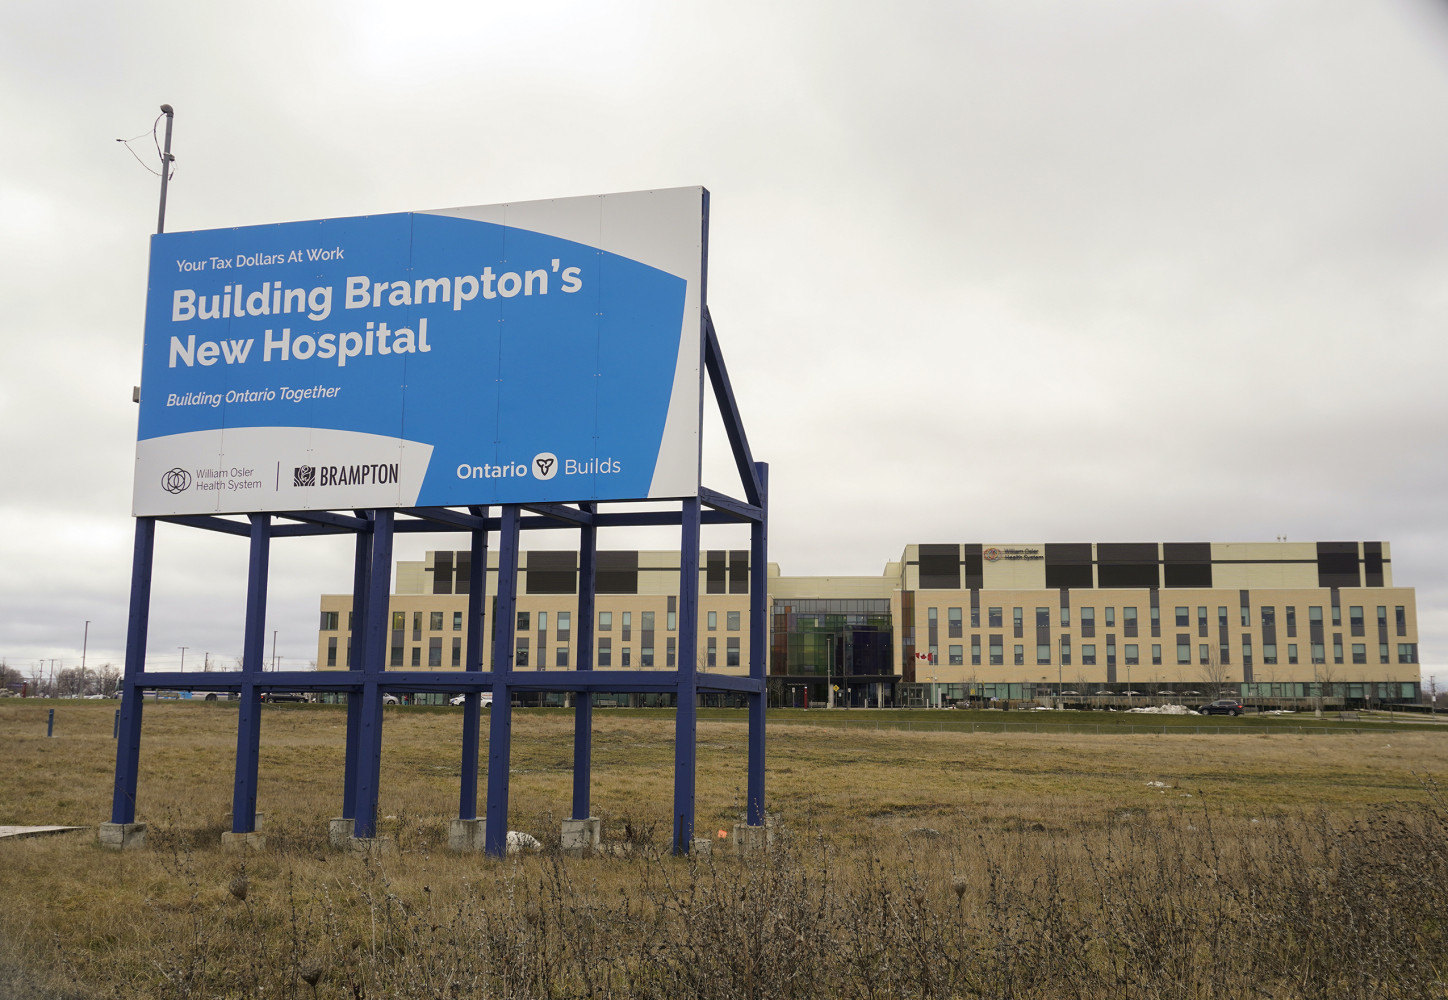 Region of Peel can’t support Brampton’s $12.5M request for cancer centre after Patrick Brown tried to torpedo local funding